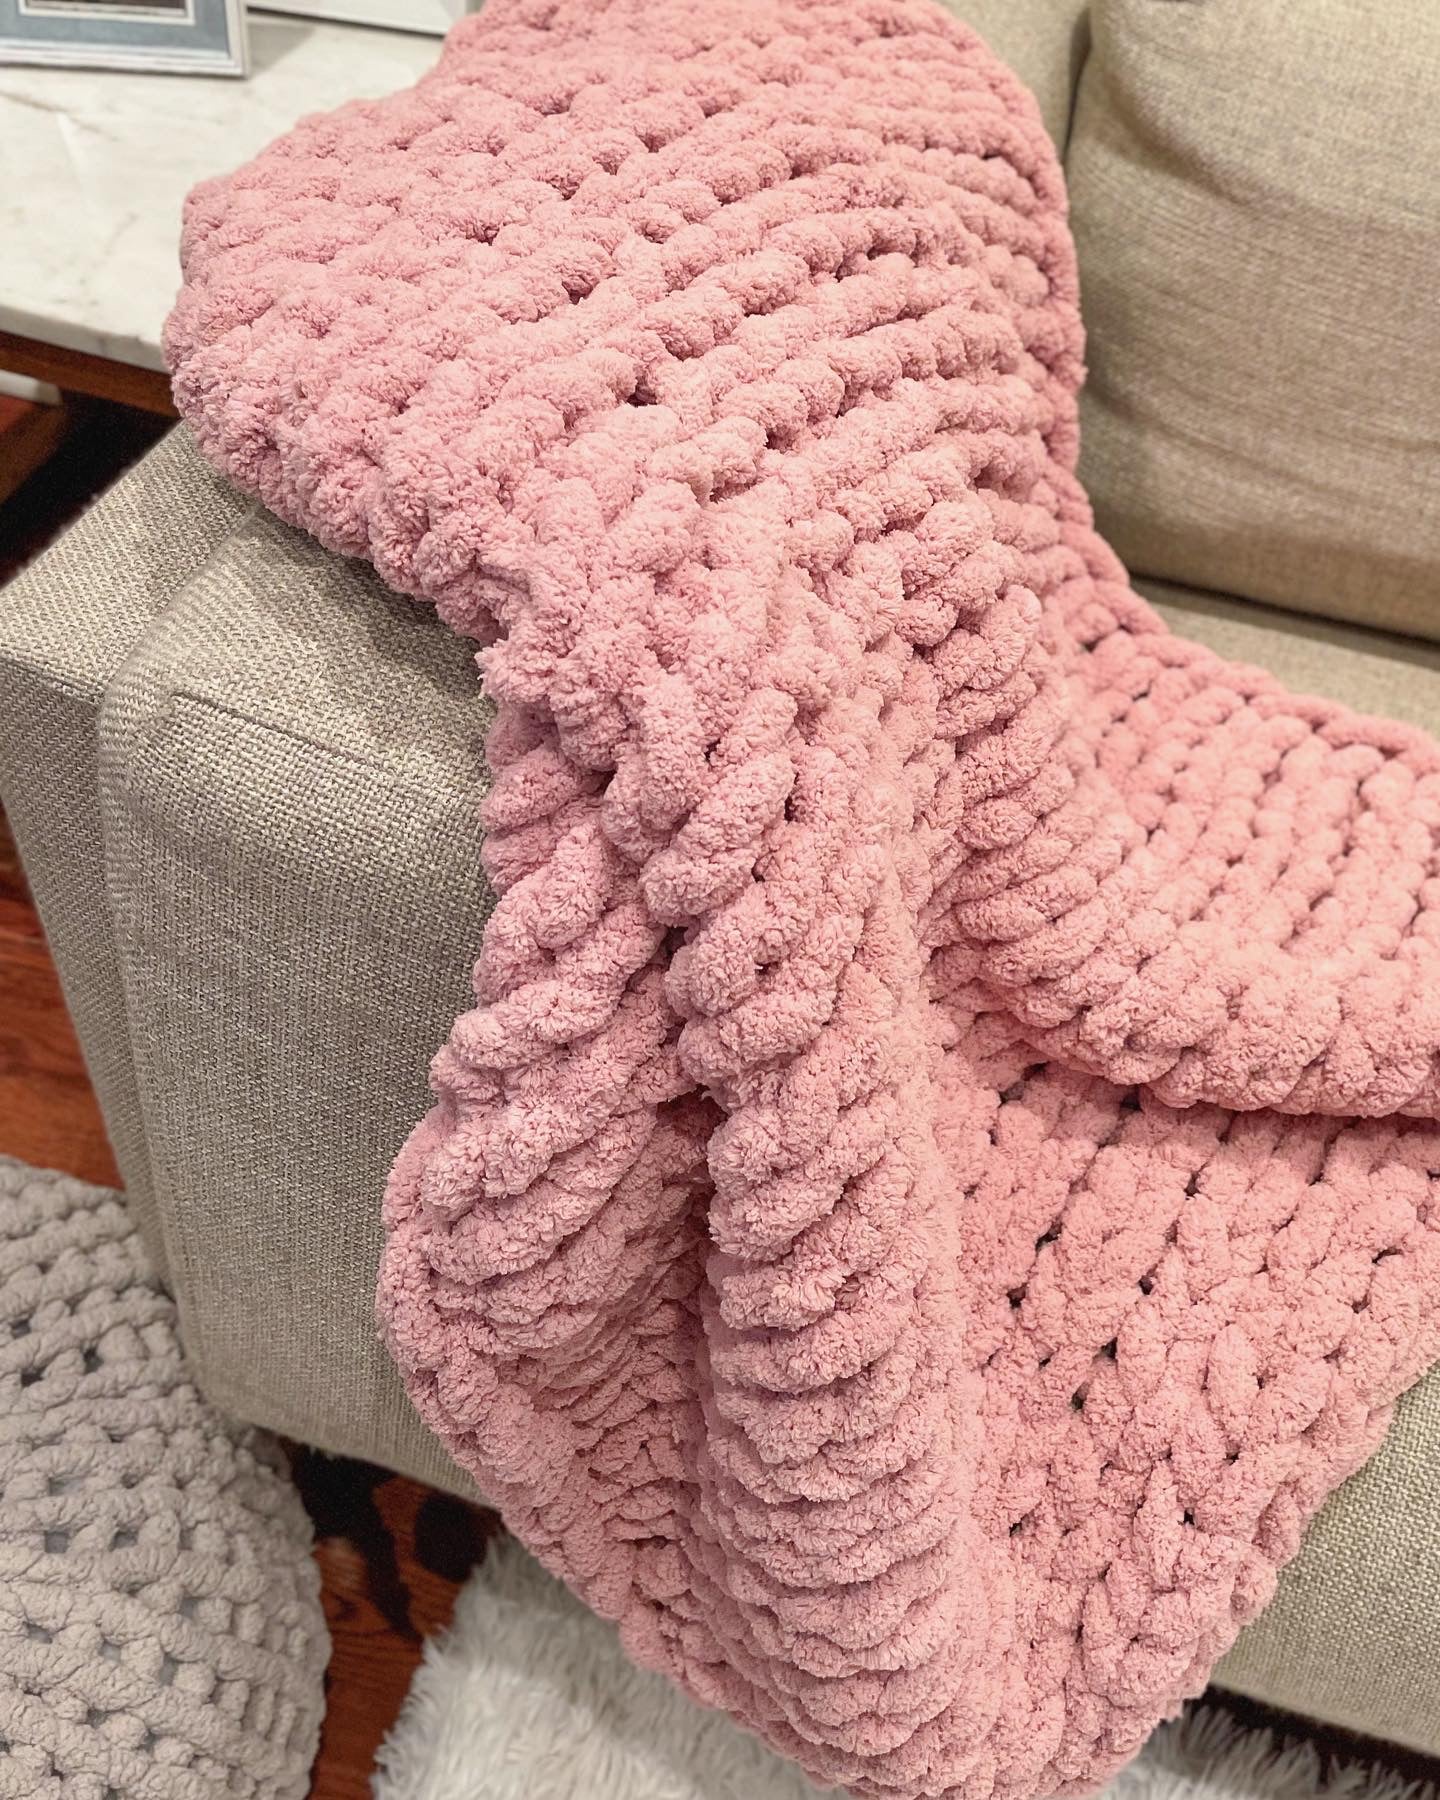 HEARTH & STONE Chunky Knit Blanket 50x60 - Fluffy Weighted Throw Blanket  - Hand Made Yarn Knitted, Braided Warm Blankets for Bed Sofa (Blush Pink)